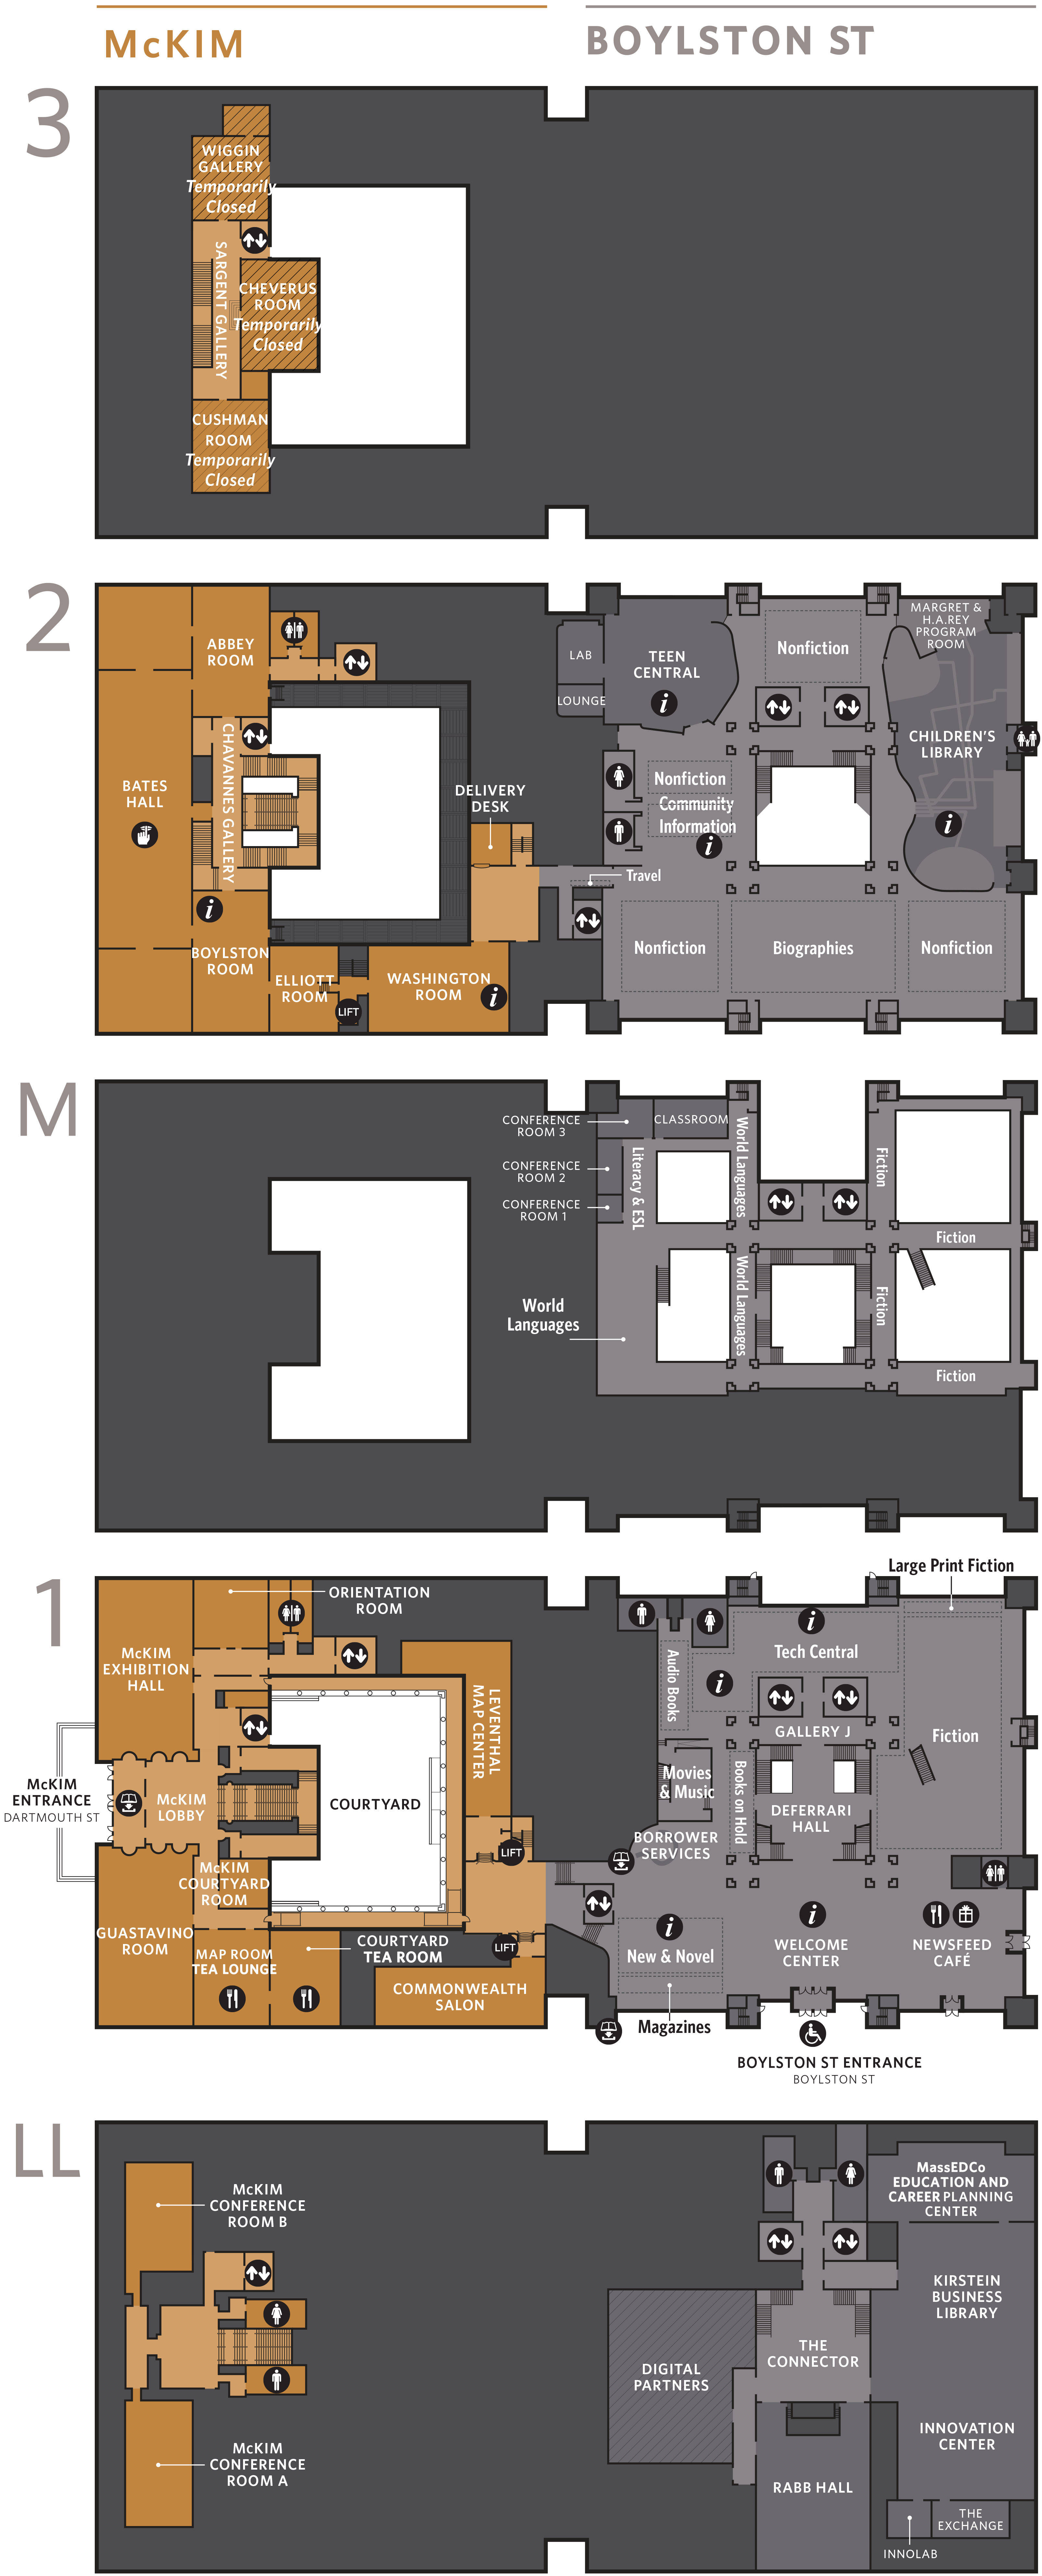 This map shows the lower level, the first floor, the second floor, and third floor of the Boylston Street and McKim Buildings. A more accessible PDF is linked in the page above.